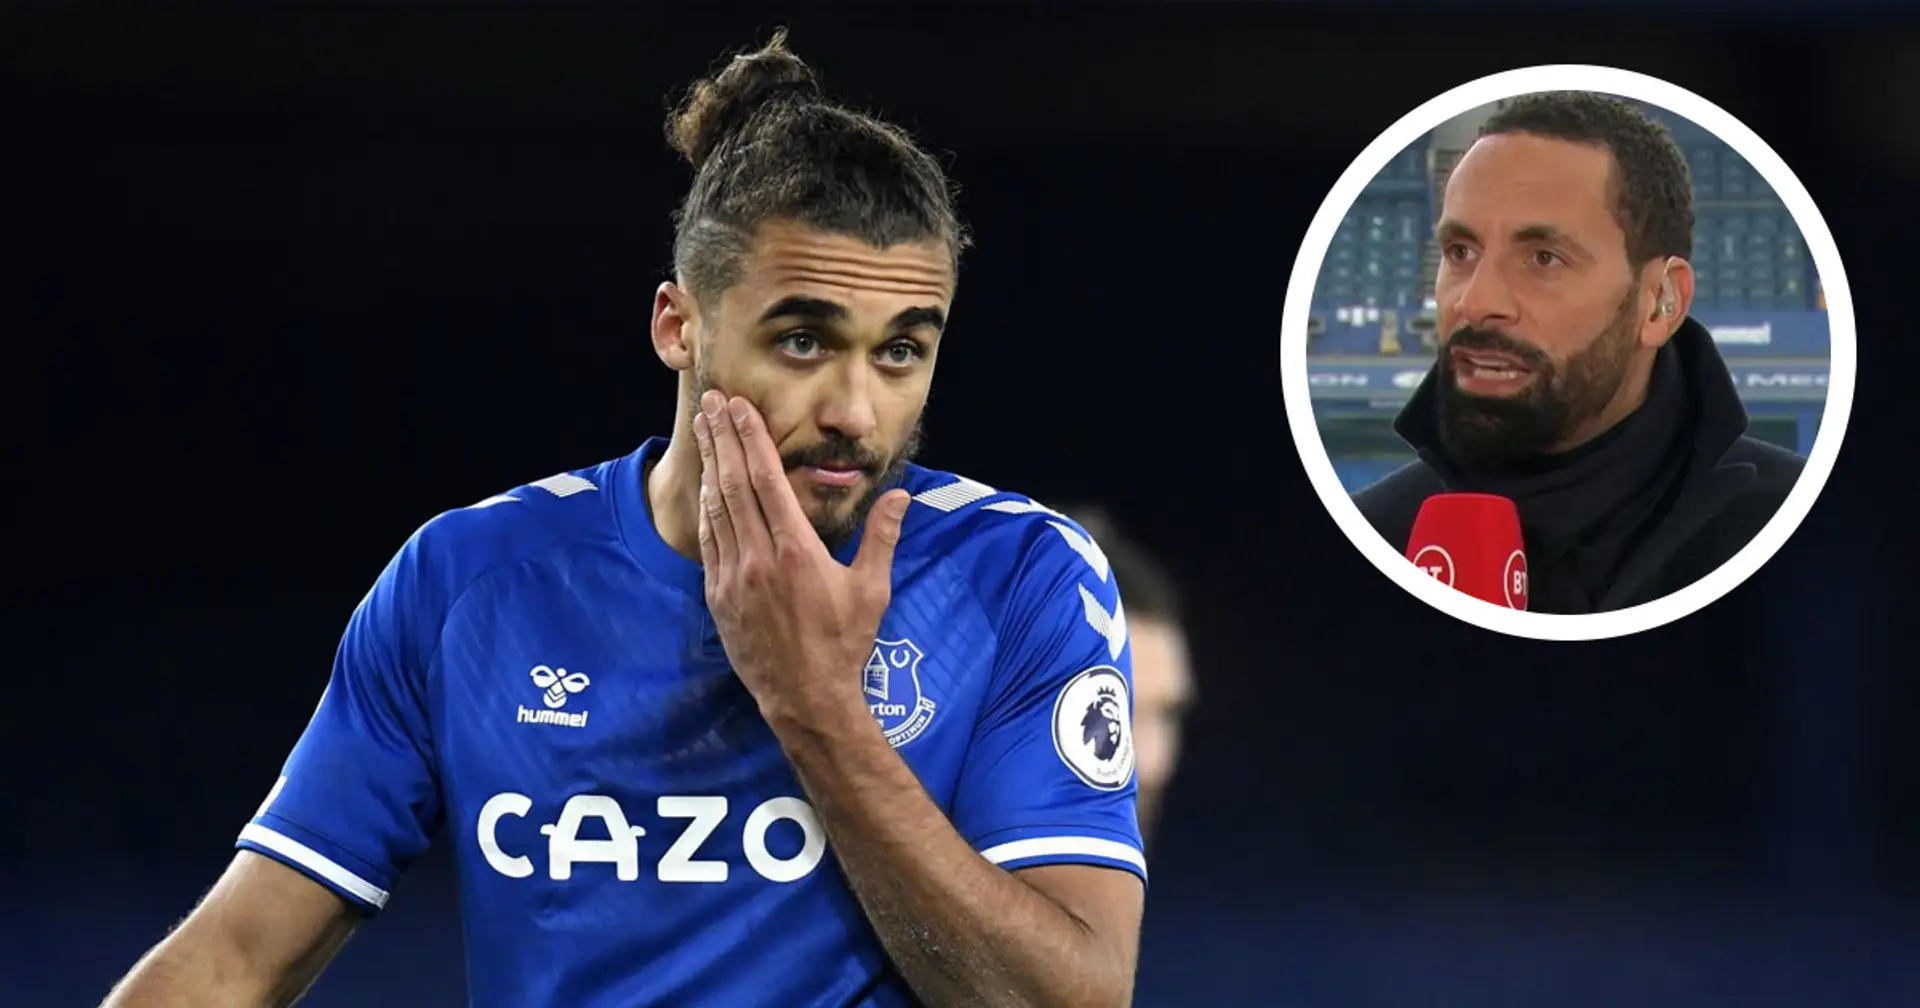 'He’d be a fantastic signing': Rio Ferdinand urges Man United to go for Dominic Calvert-Lewin